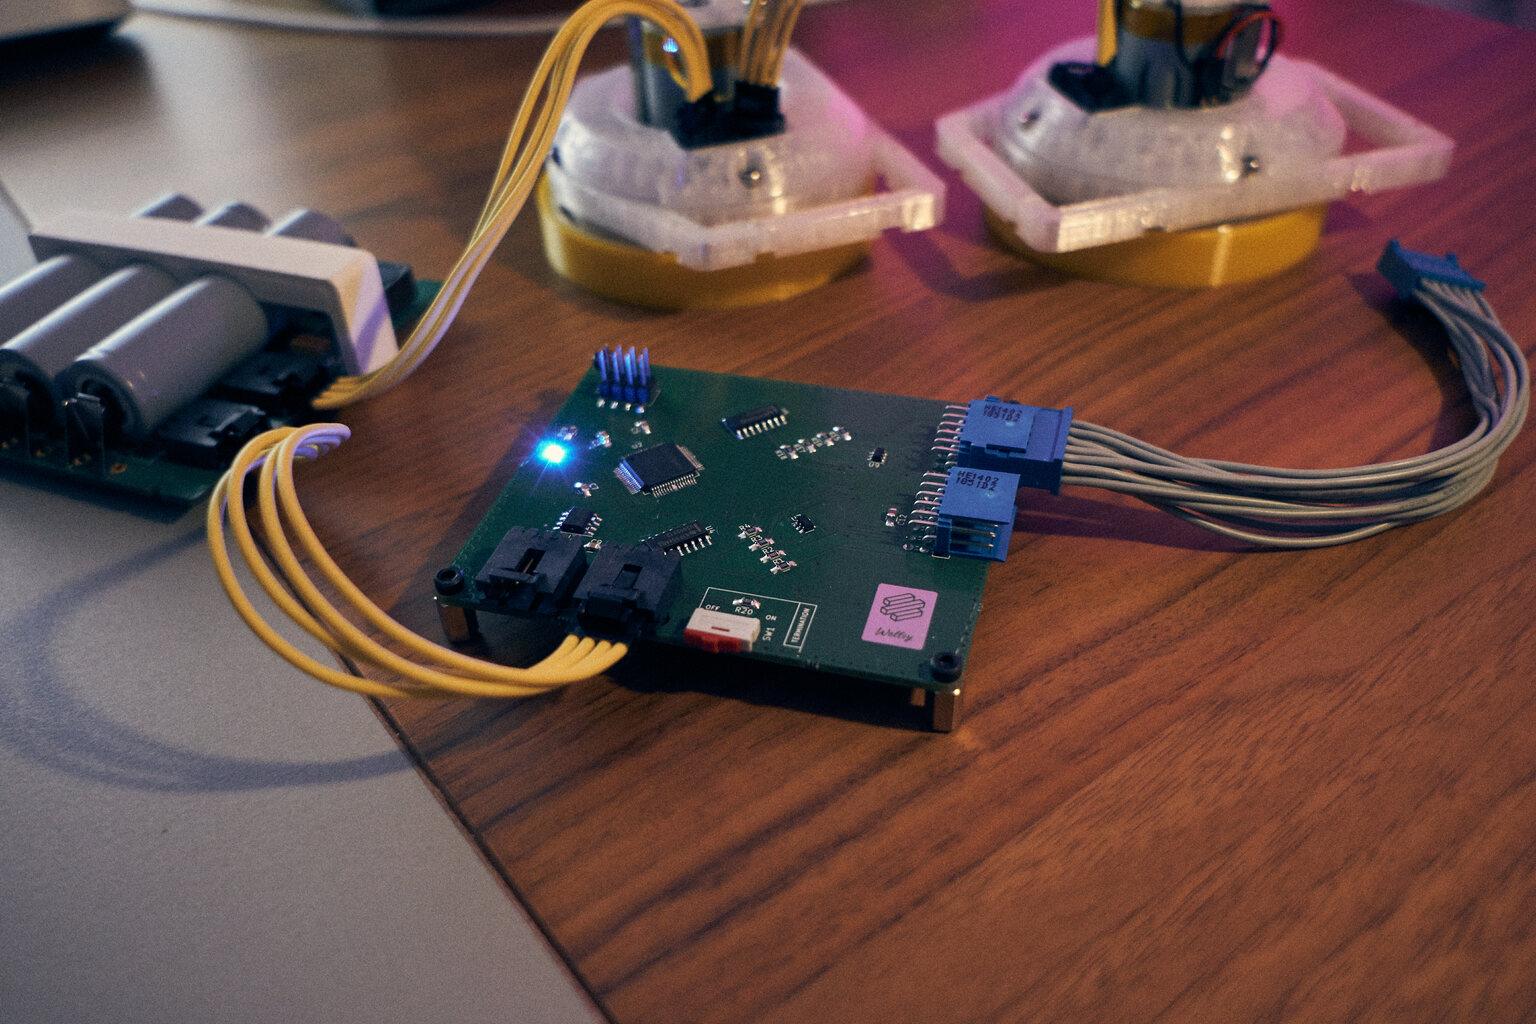 The DevECU module connected to the other modules.